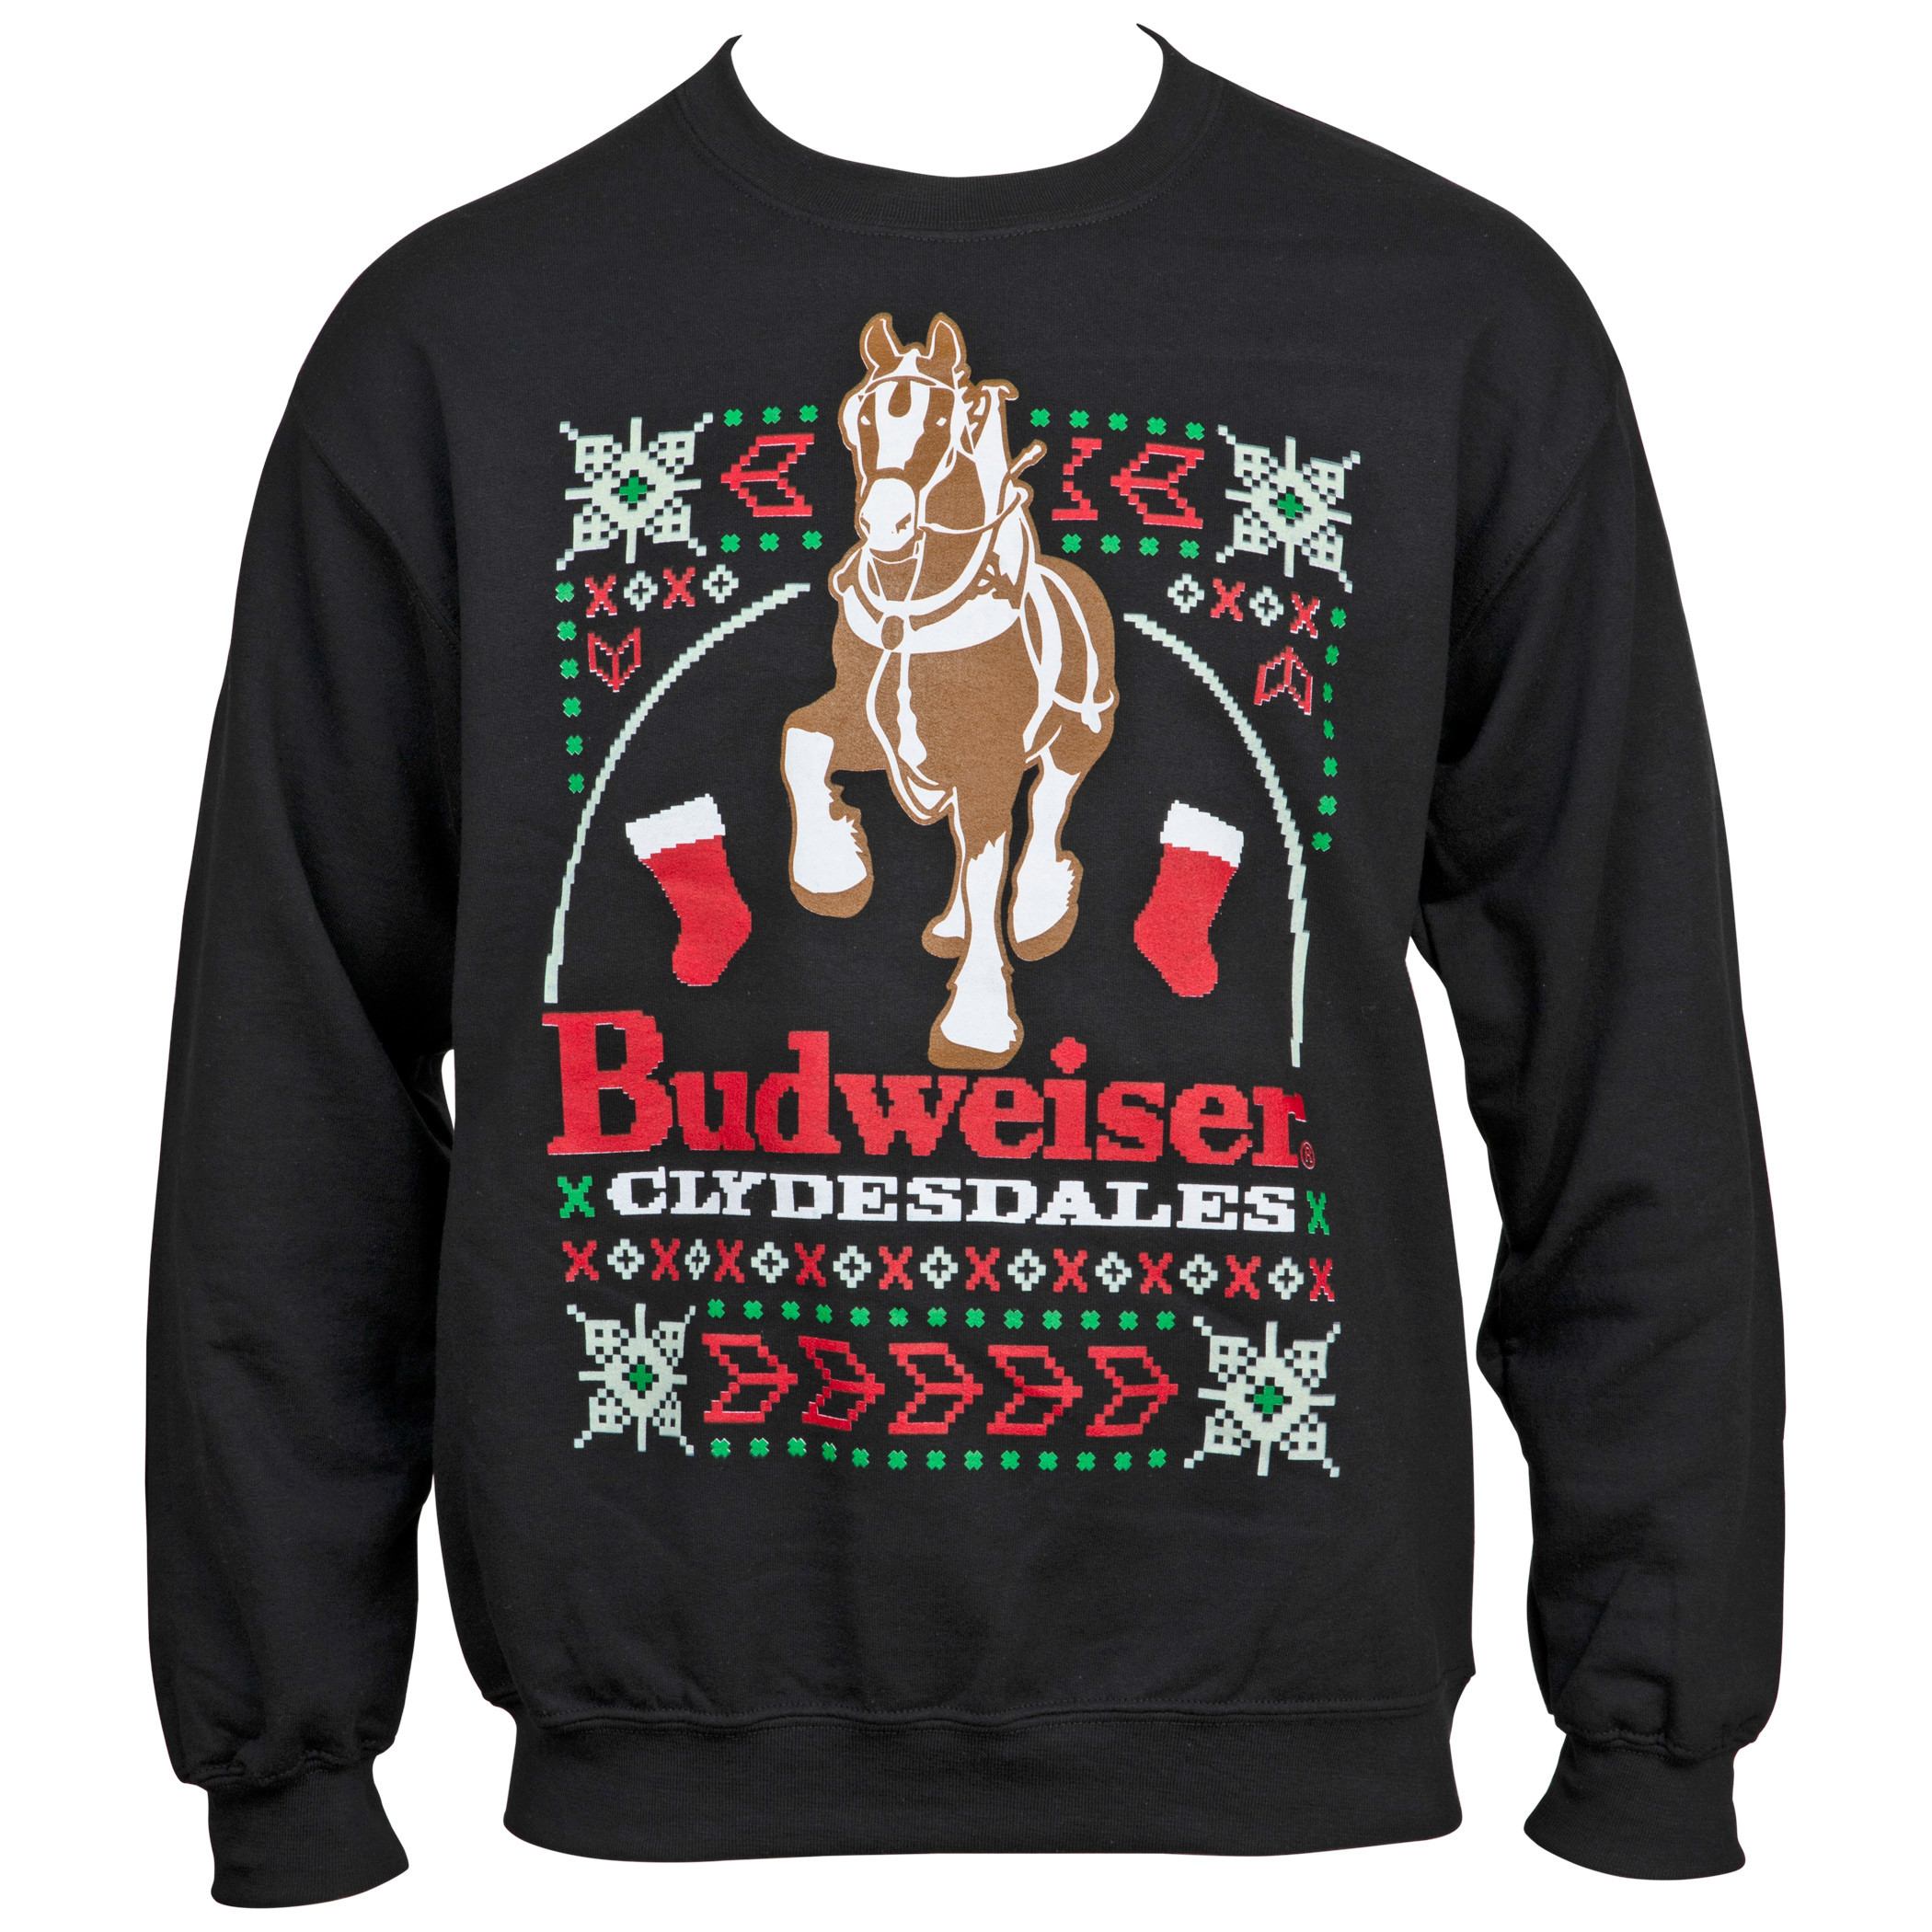 Budweiser Clydesdales Ugly Sweater Sweatshirt